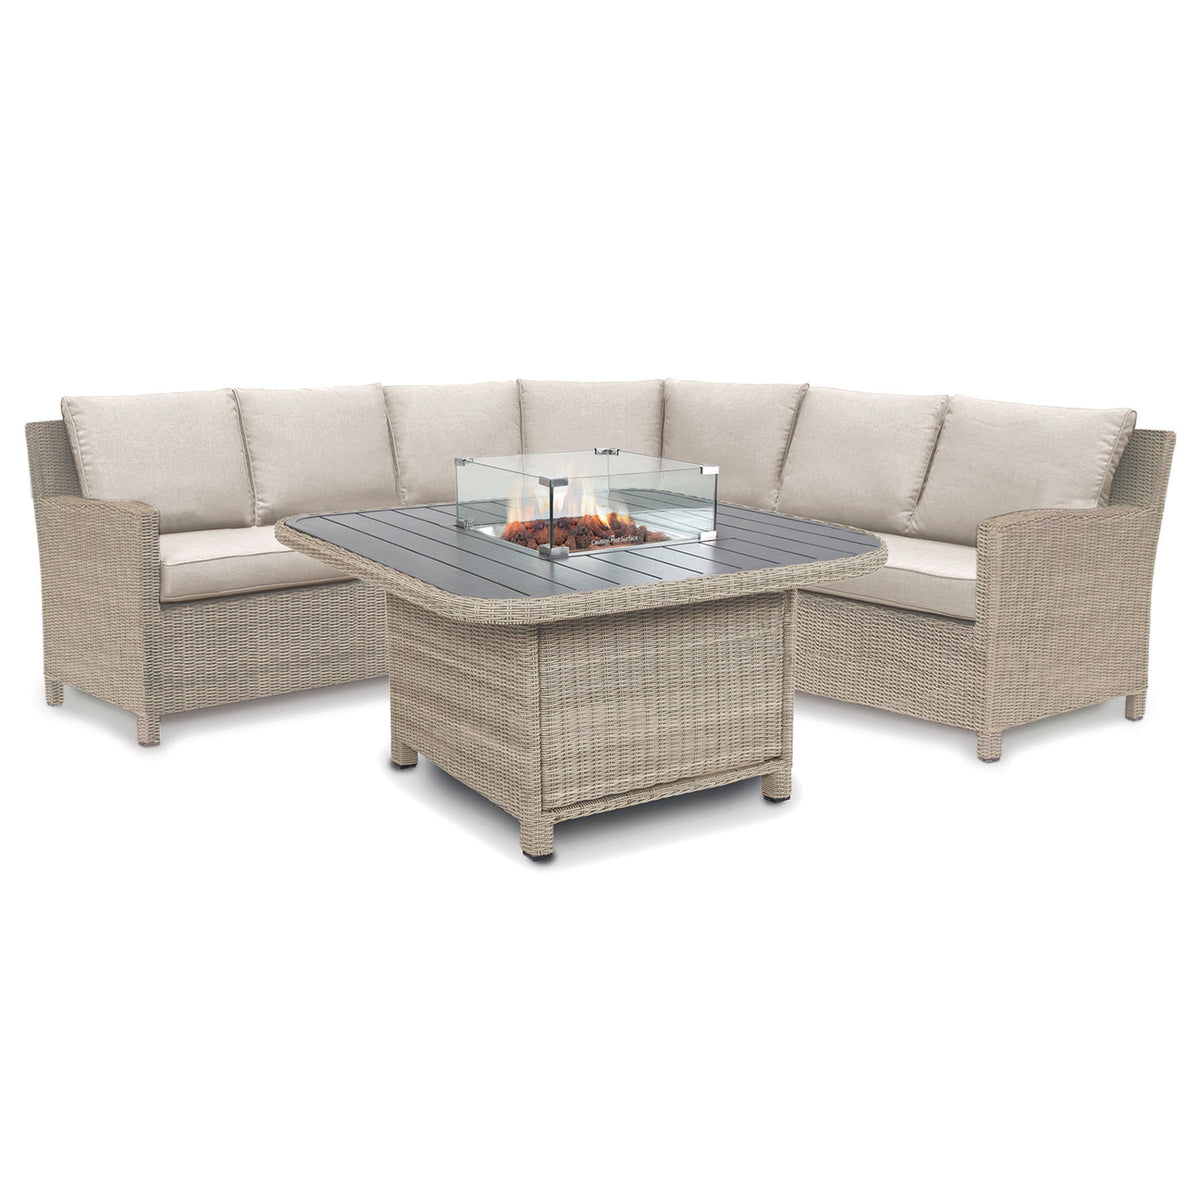 Kettler Palma Grande Oyster Wicker Corner Sofa Set with Fire Pit Table